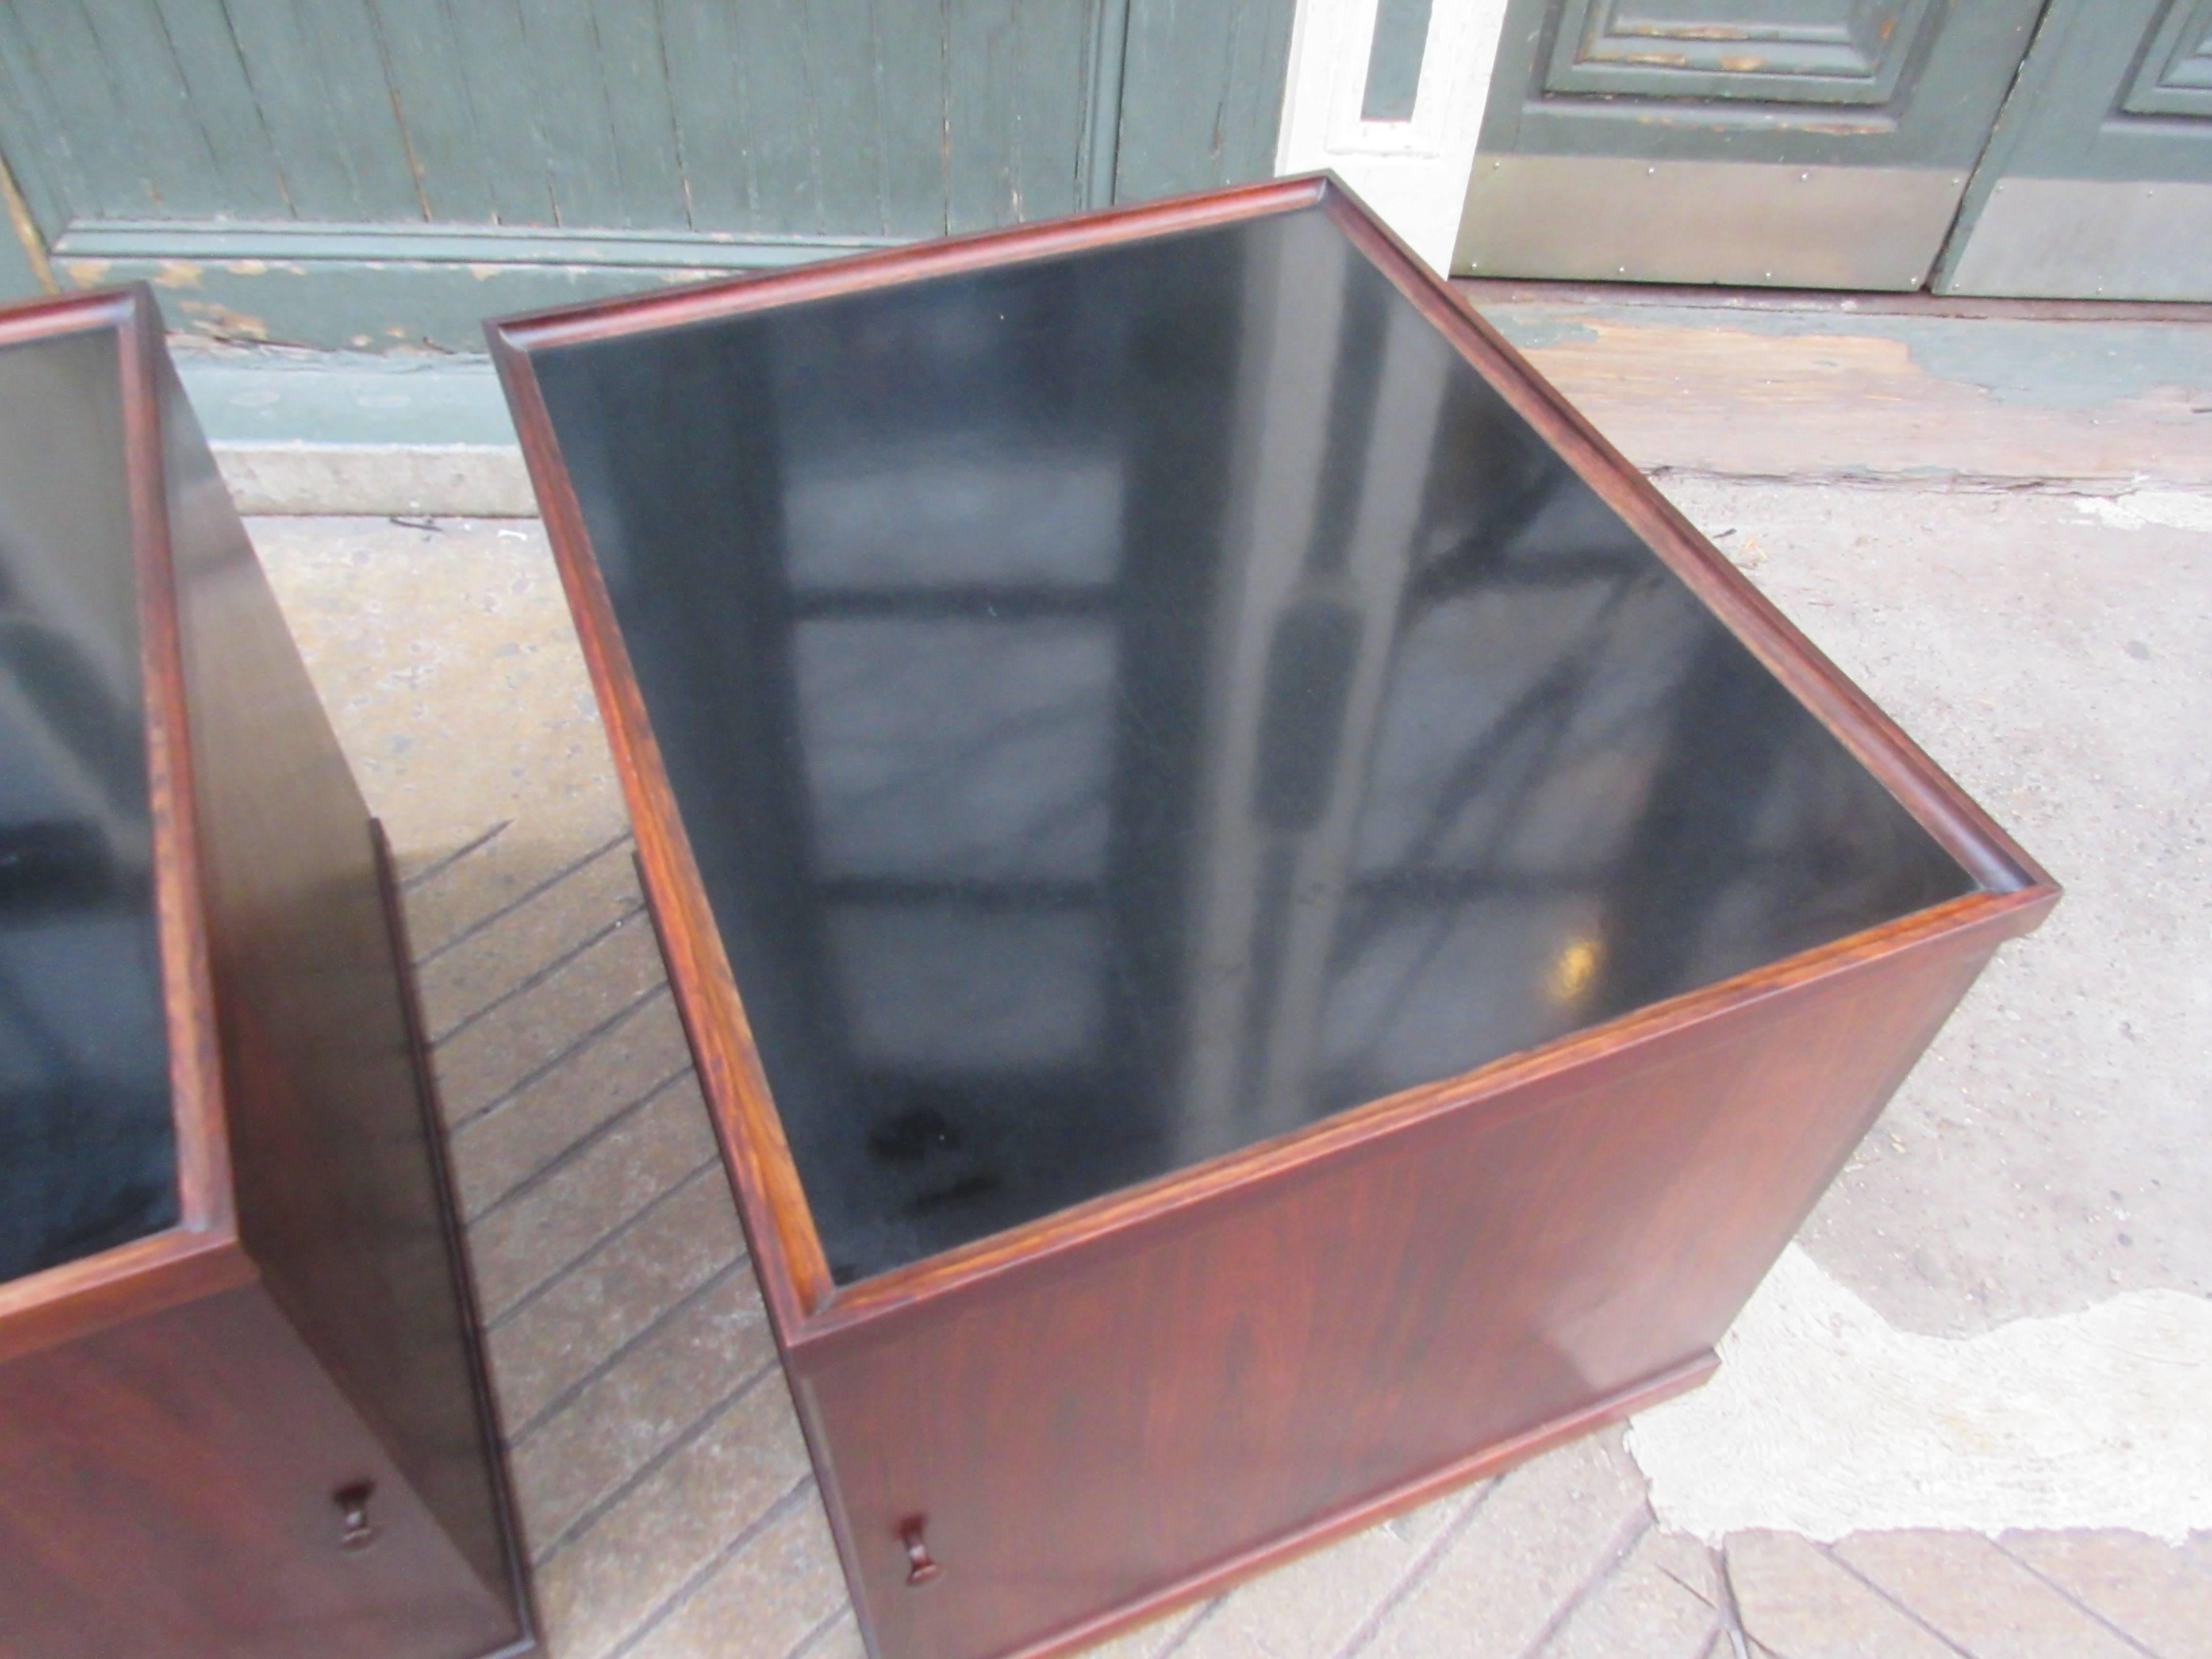 These rosewood cubes with black laminate tops have single doors which reveal shelving for glasses and an open center space for bottles making matching sofa end tables which double as bars. They were bought in Denmark in the late 1950s and are